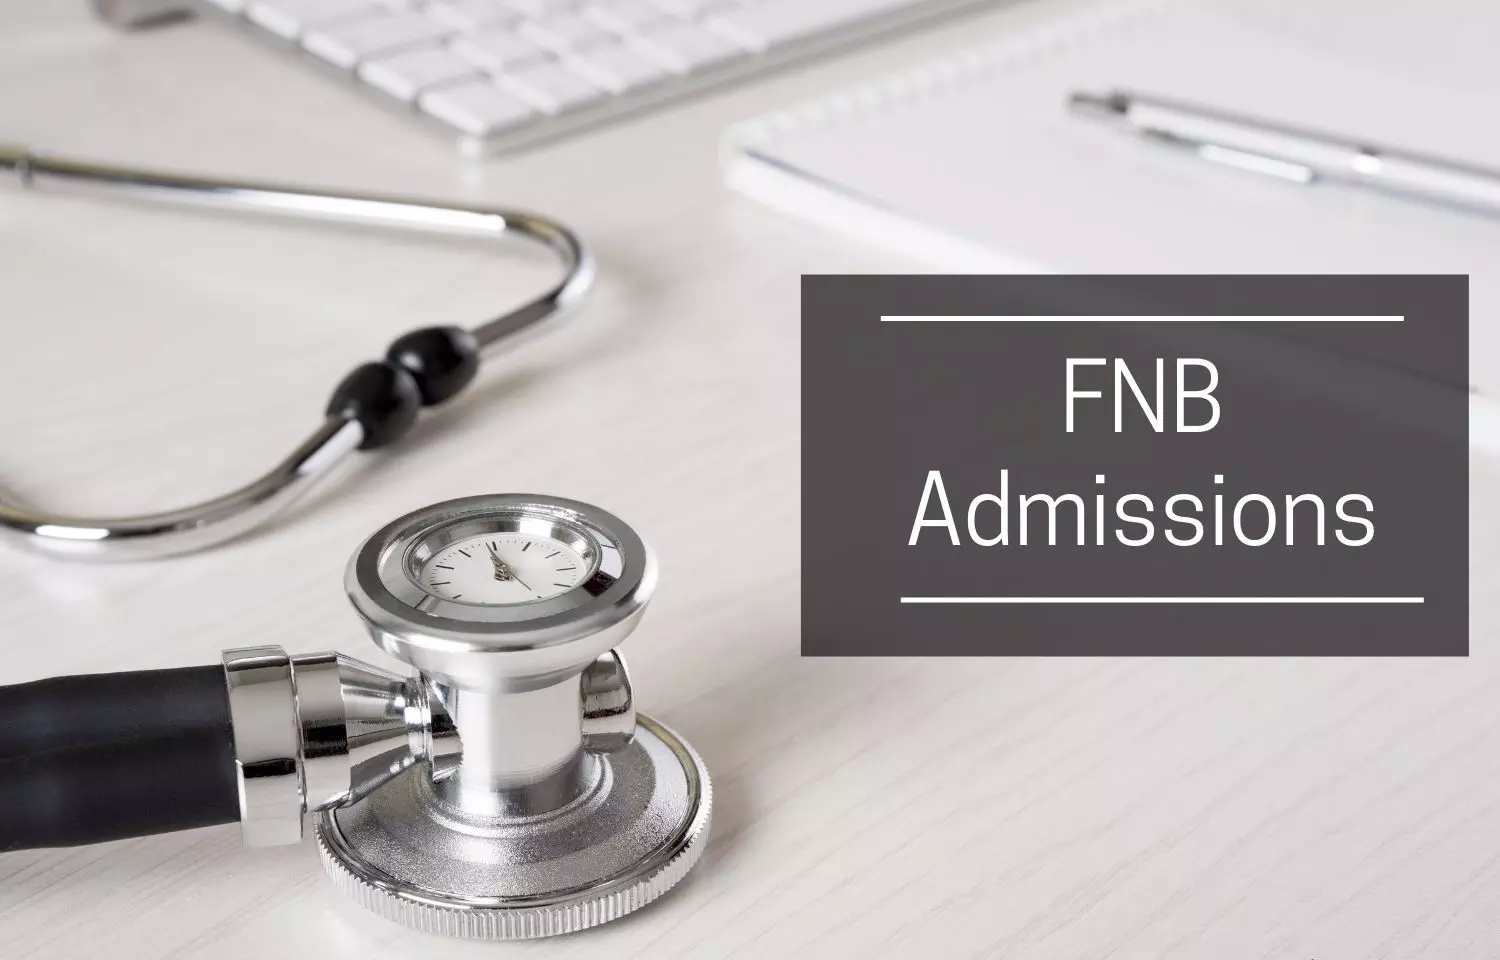 NBE releases Result of Round 1 FNB Counselling, Details